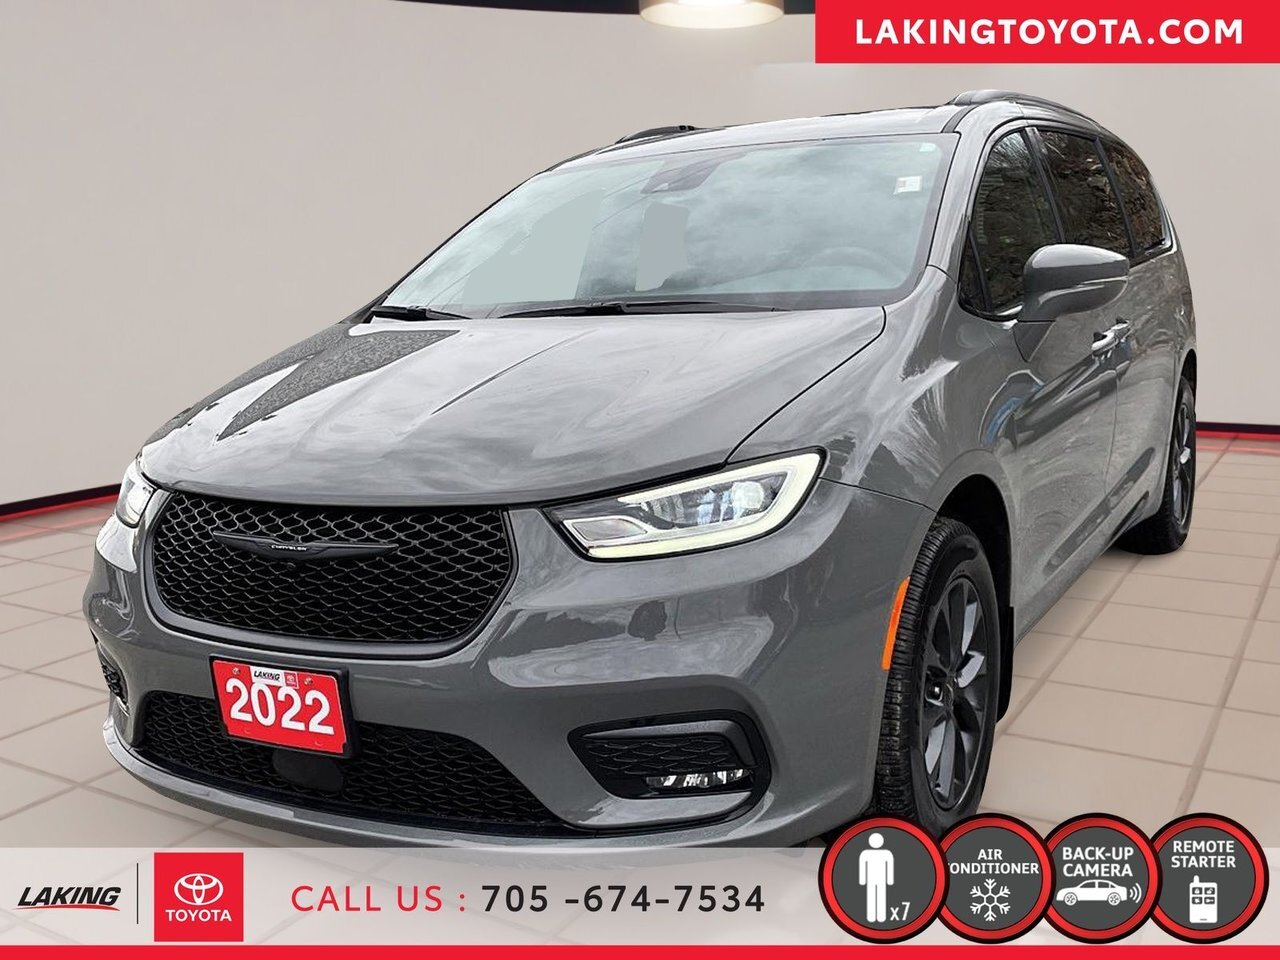 2022 Chrysler Pacifica Touring AWD 3rd Row Seating (7 Passenger) This Pac